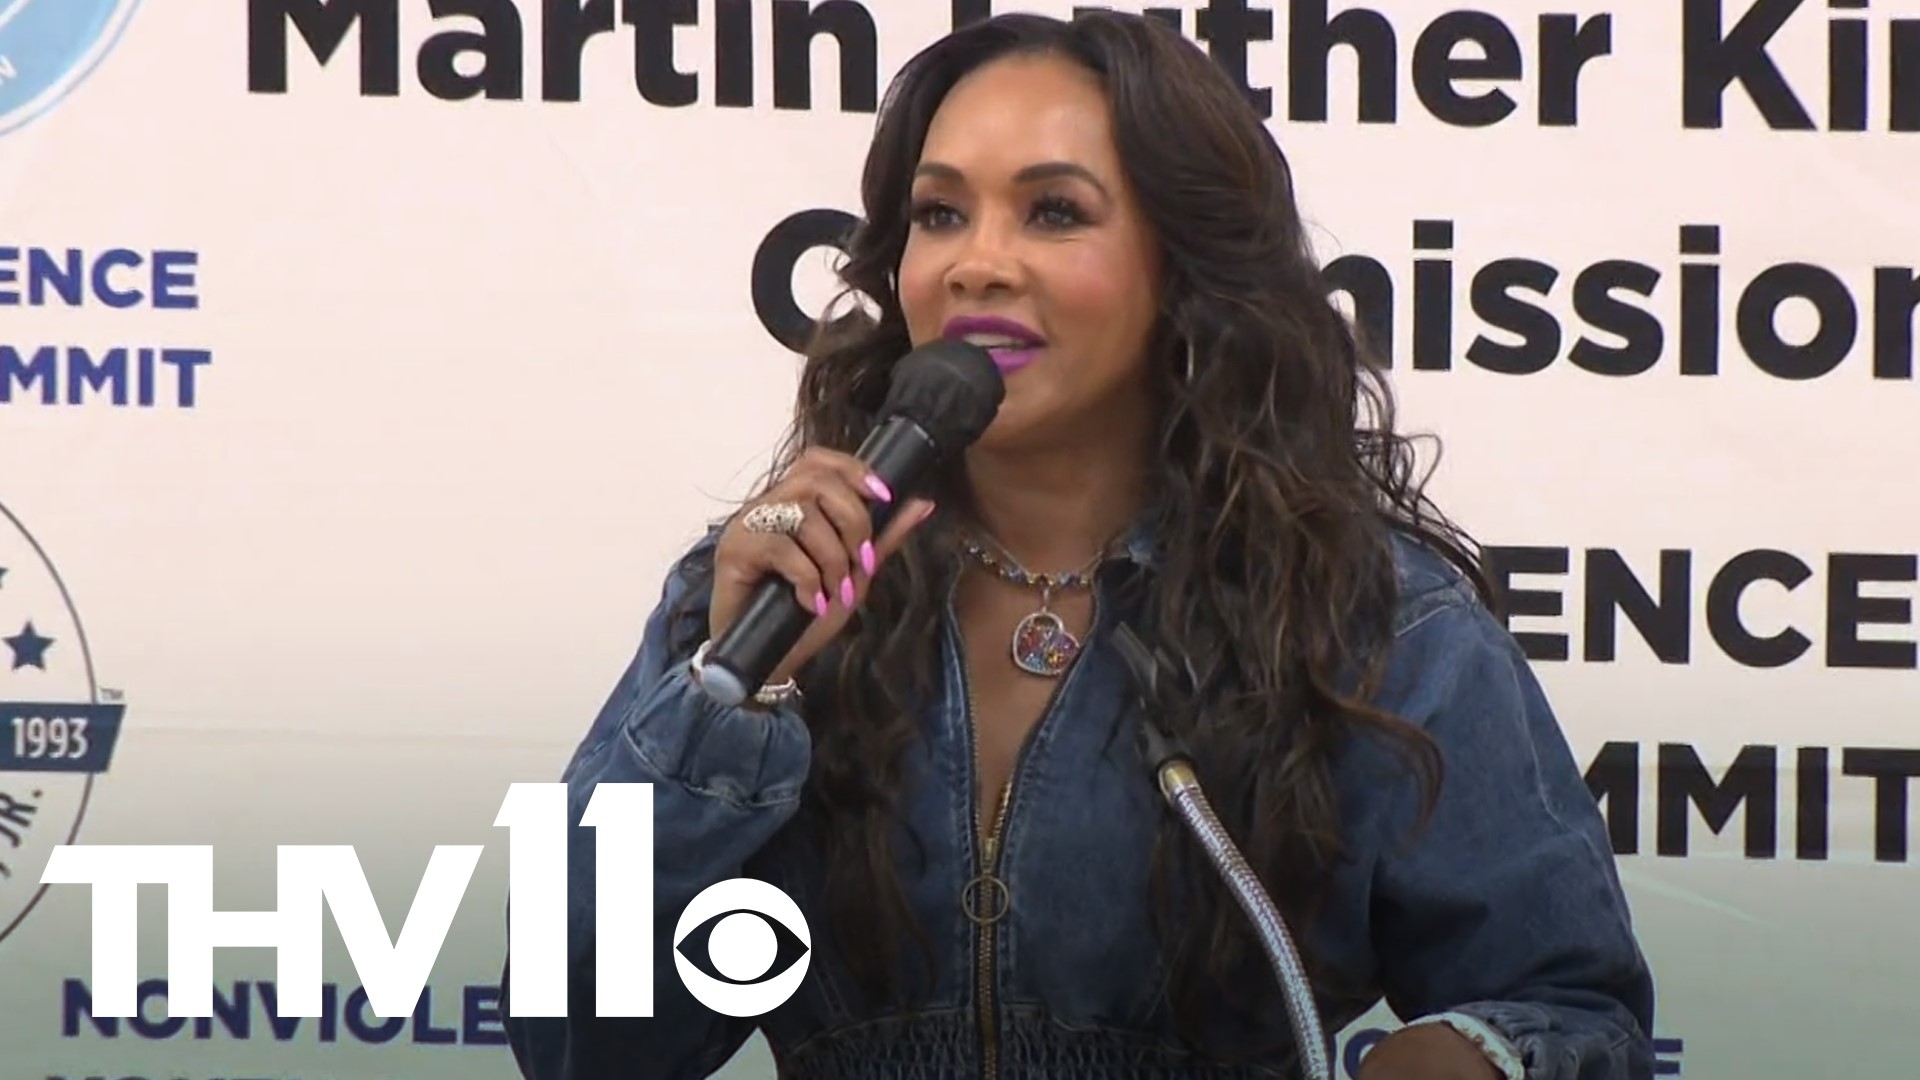 Vivica A. Fox joined the Arkansas MLK Jr. Commission in Dumas for the 6th non-violent youth summit of the year.